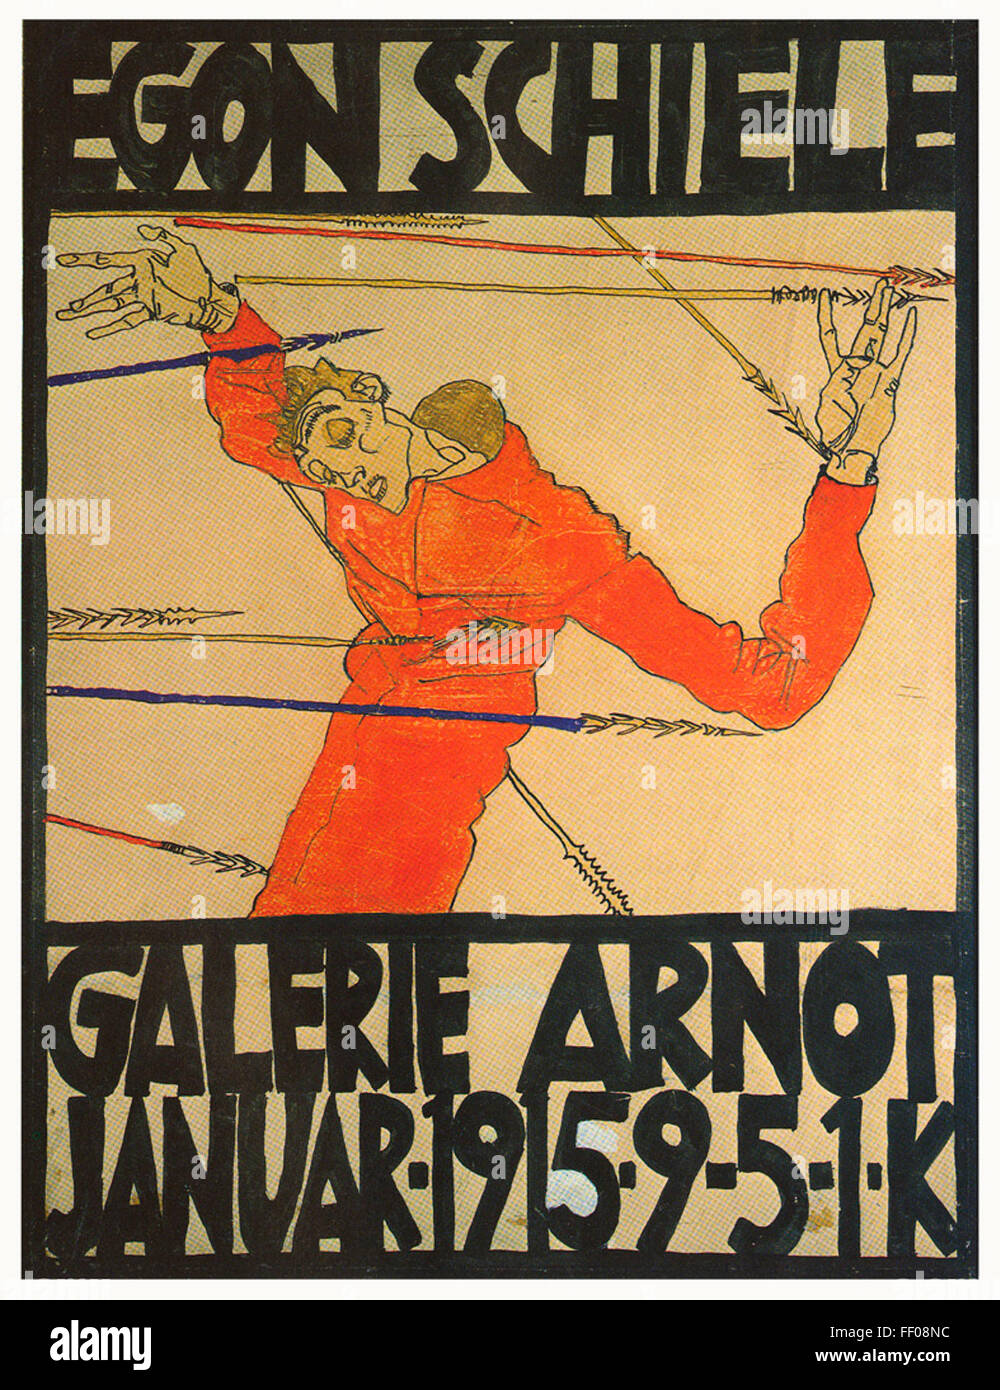 Poster for exhibition at the Galerie Arnot by Egon Schiele Poster for exhibition at the Galerie Arnot by Egon Schiele Stock Photo